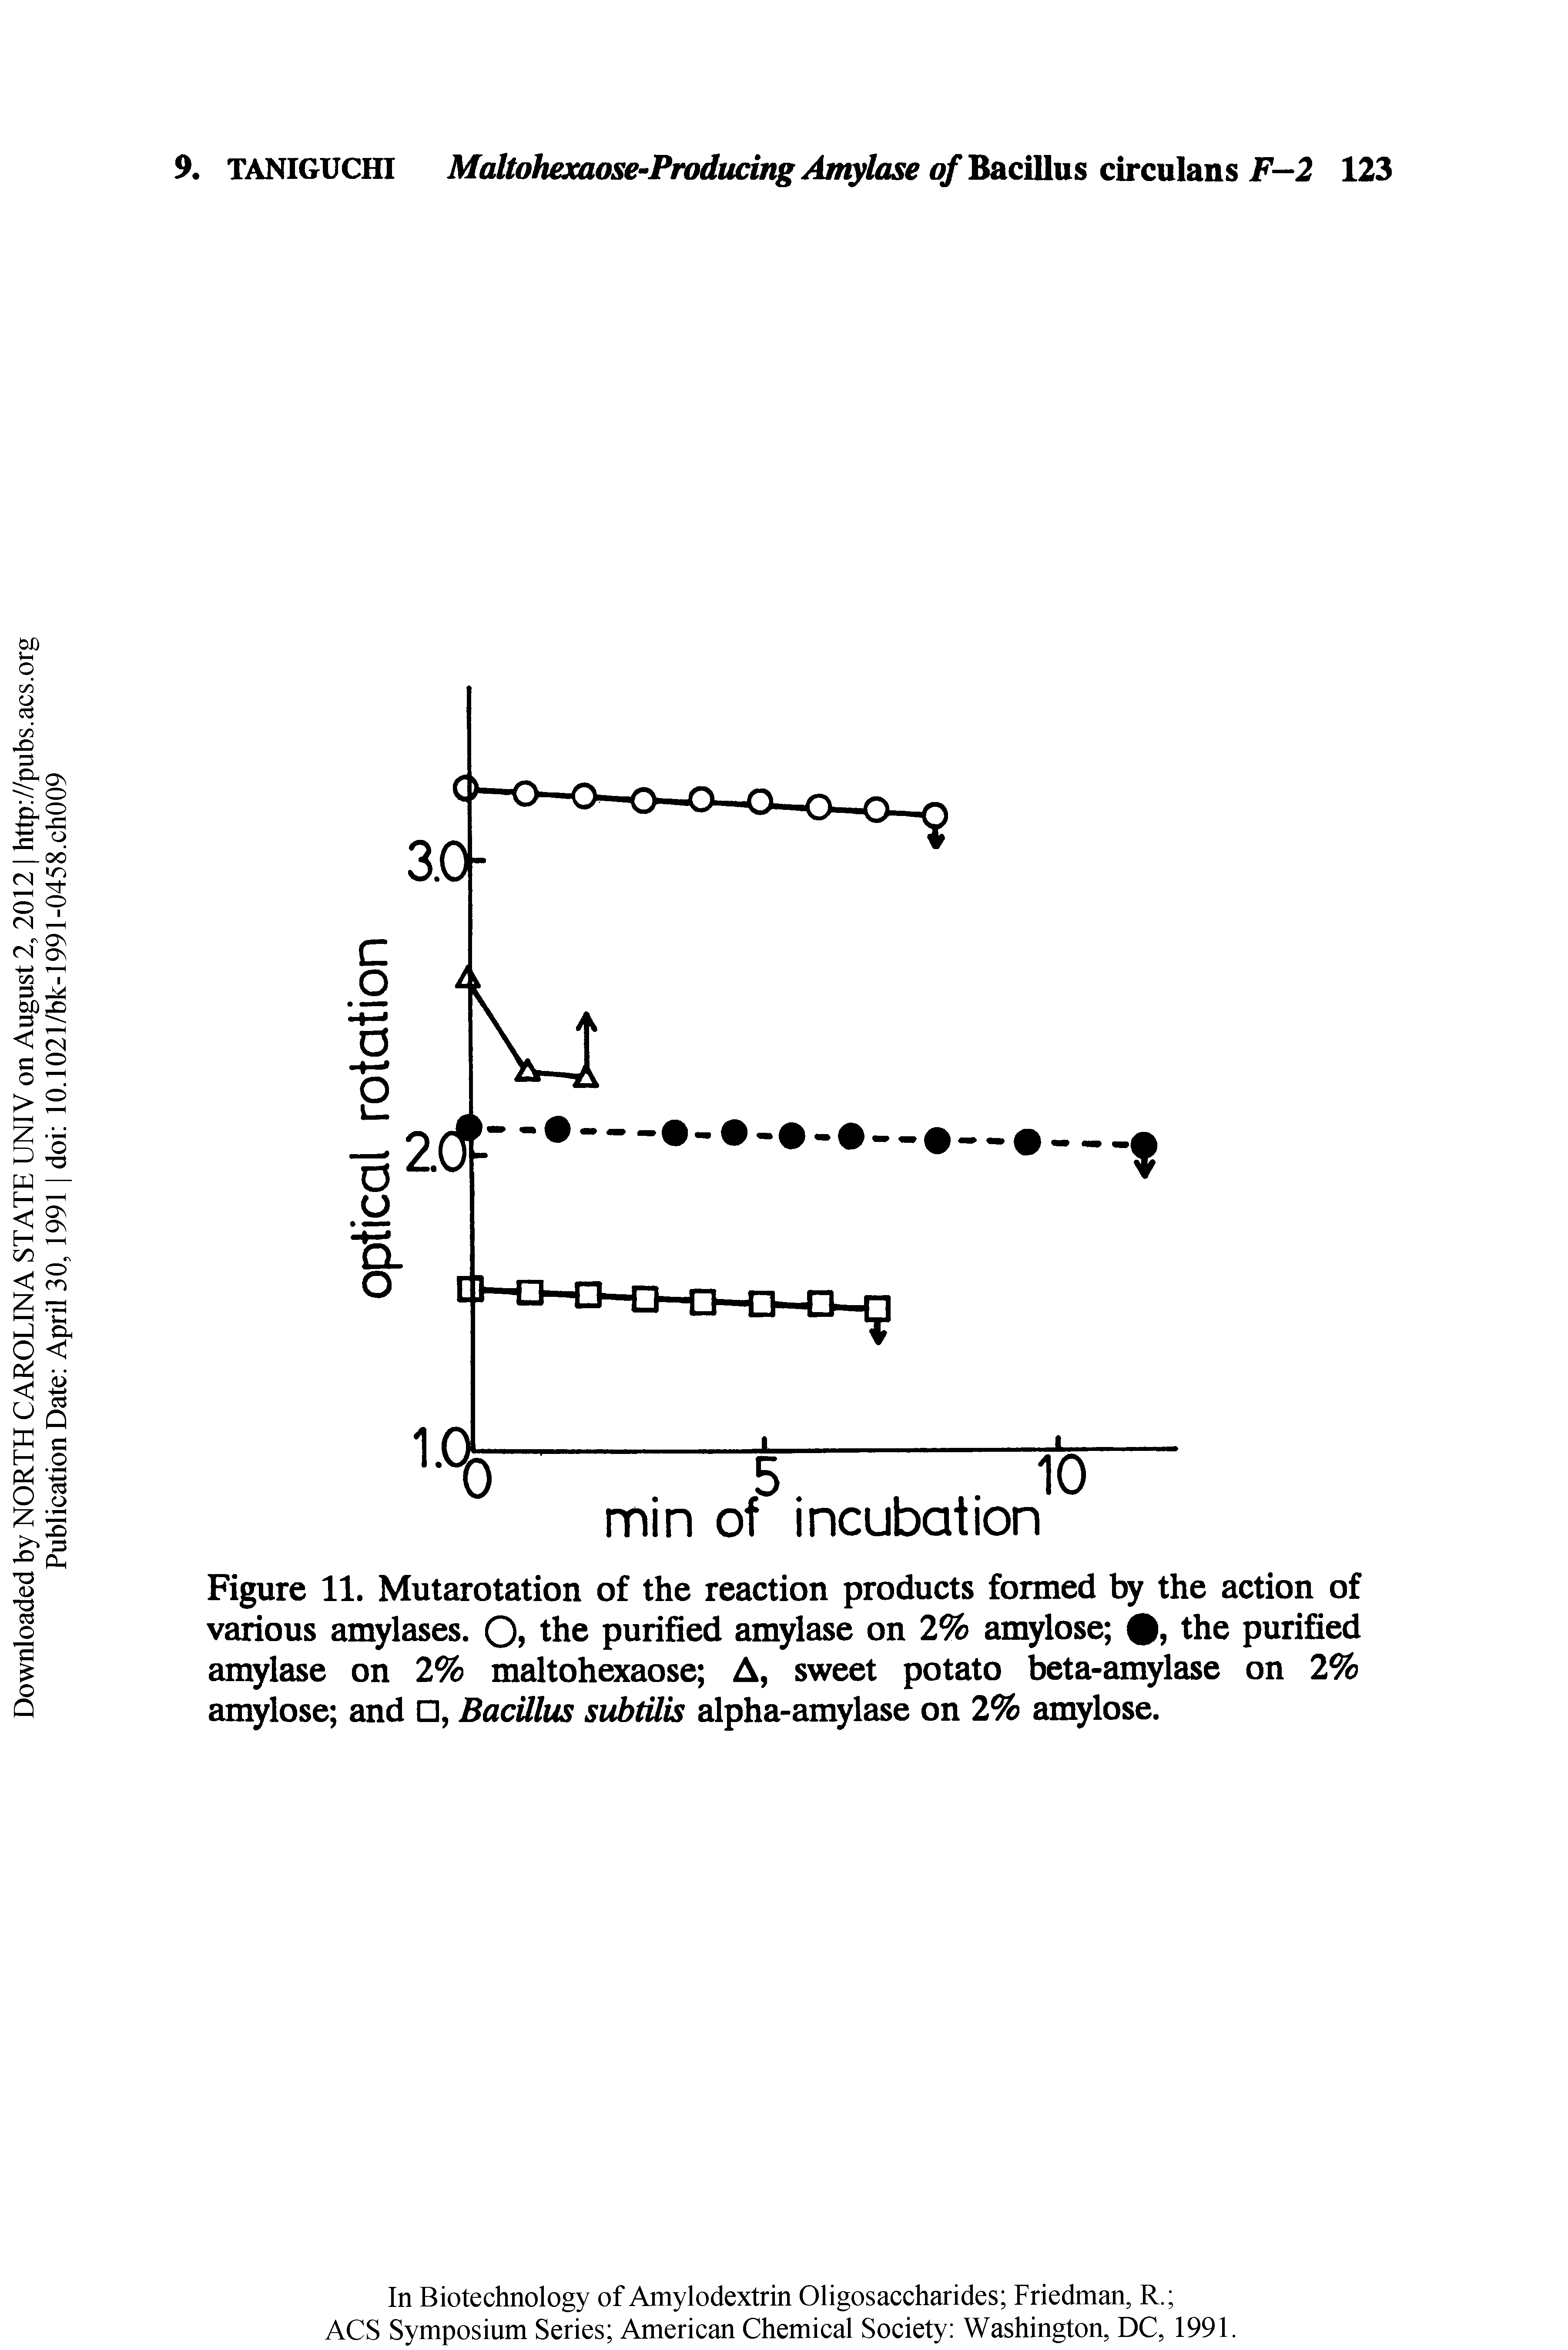 Figure 11. Mutarotation of the reaction products formed by the action of various amylases. 0> fhe purified amylase on 2% amylose , the purified amylase on 2% maltohexaose A, sweet potato beta-amylase on 2% amylose and , Bacillus subtilis alpha-amylase on 2% amylose.